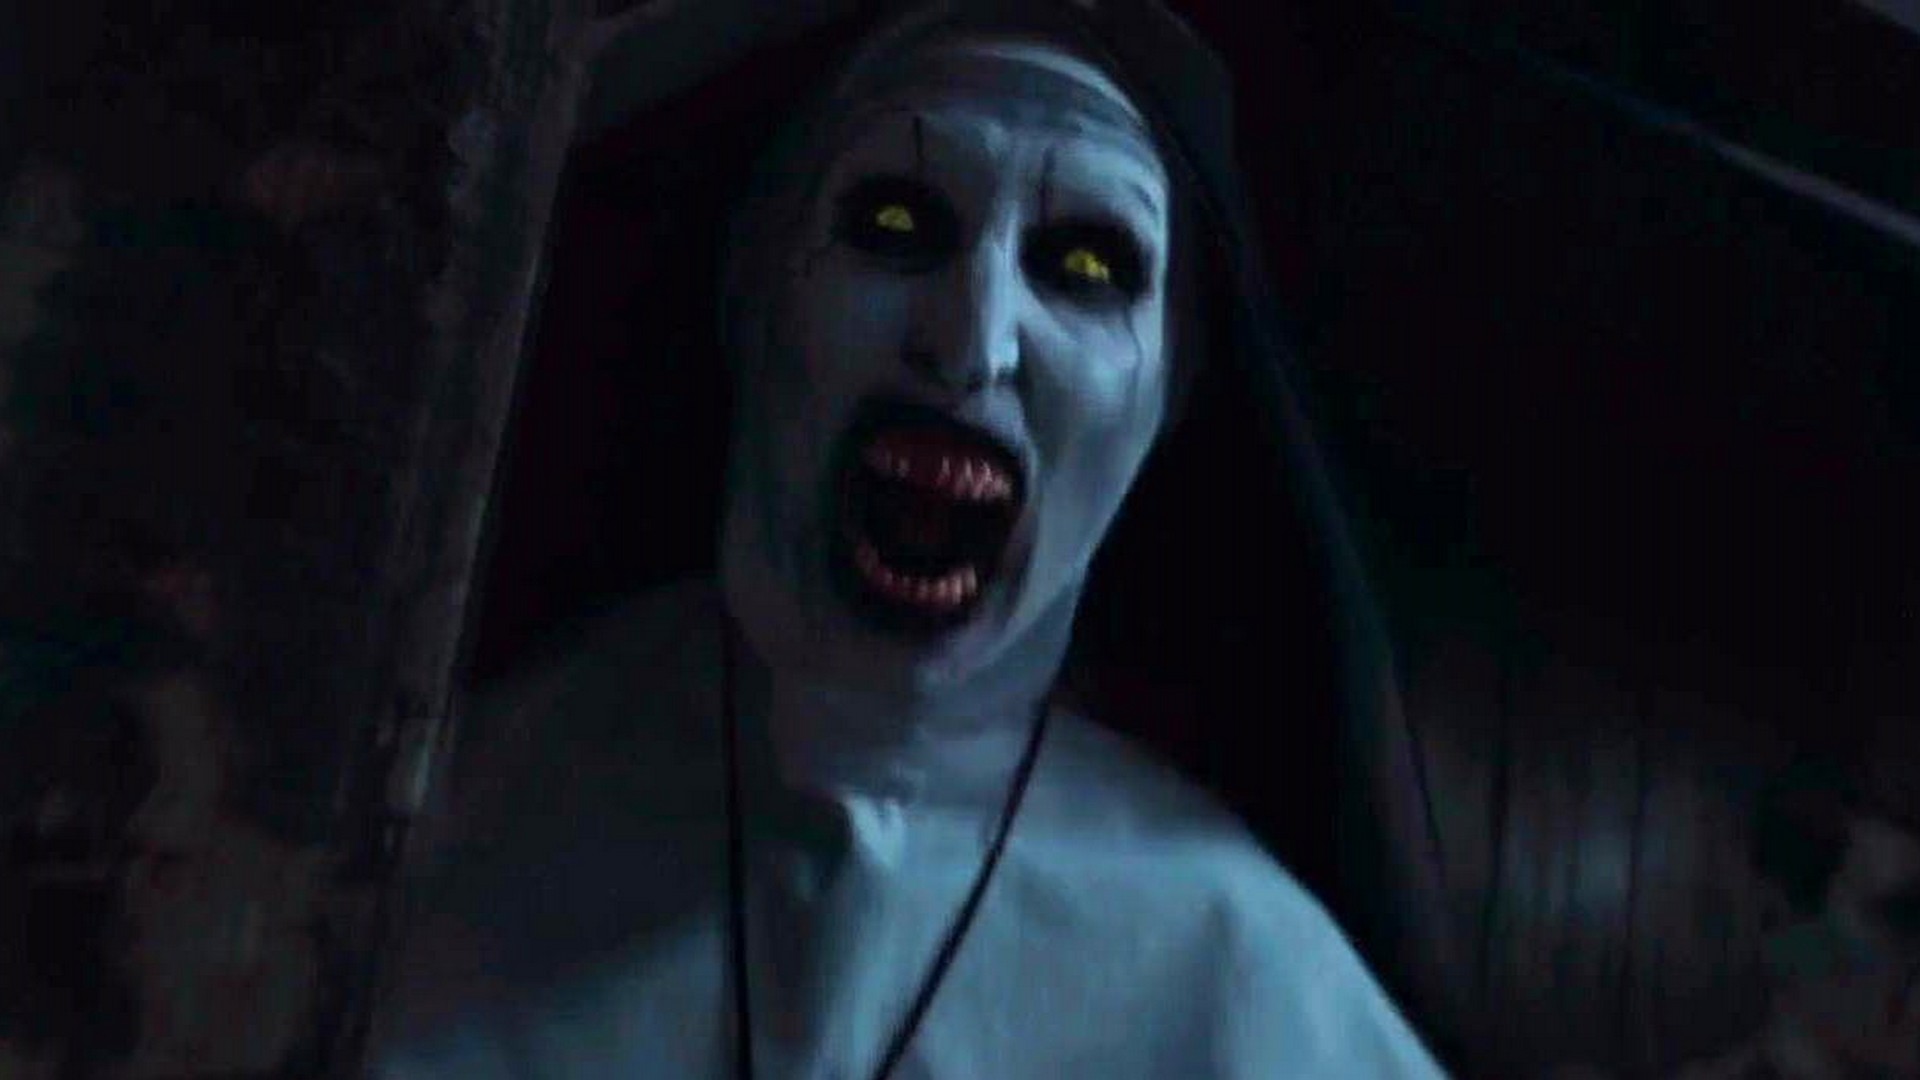 The Nun Wallpaper HD With Resolution 1920X1080 pixel. You can make this wallpaper for your Desktop Computer Backgrounds, Mac Wallpapers, Android Lock screen or iPhone Screensavers